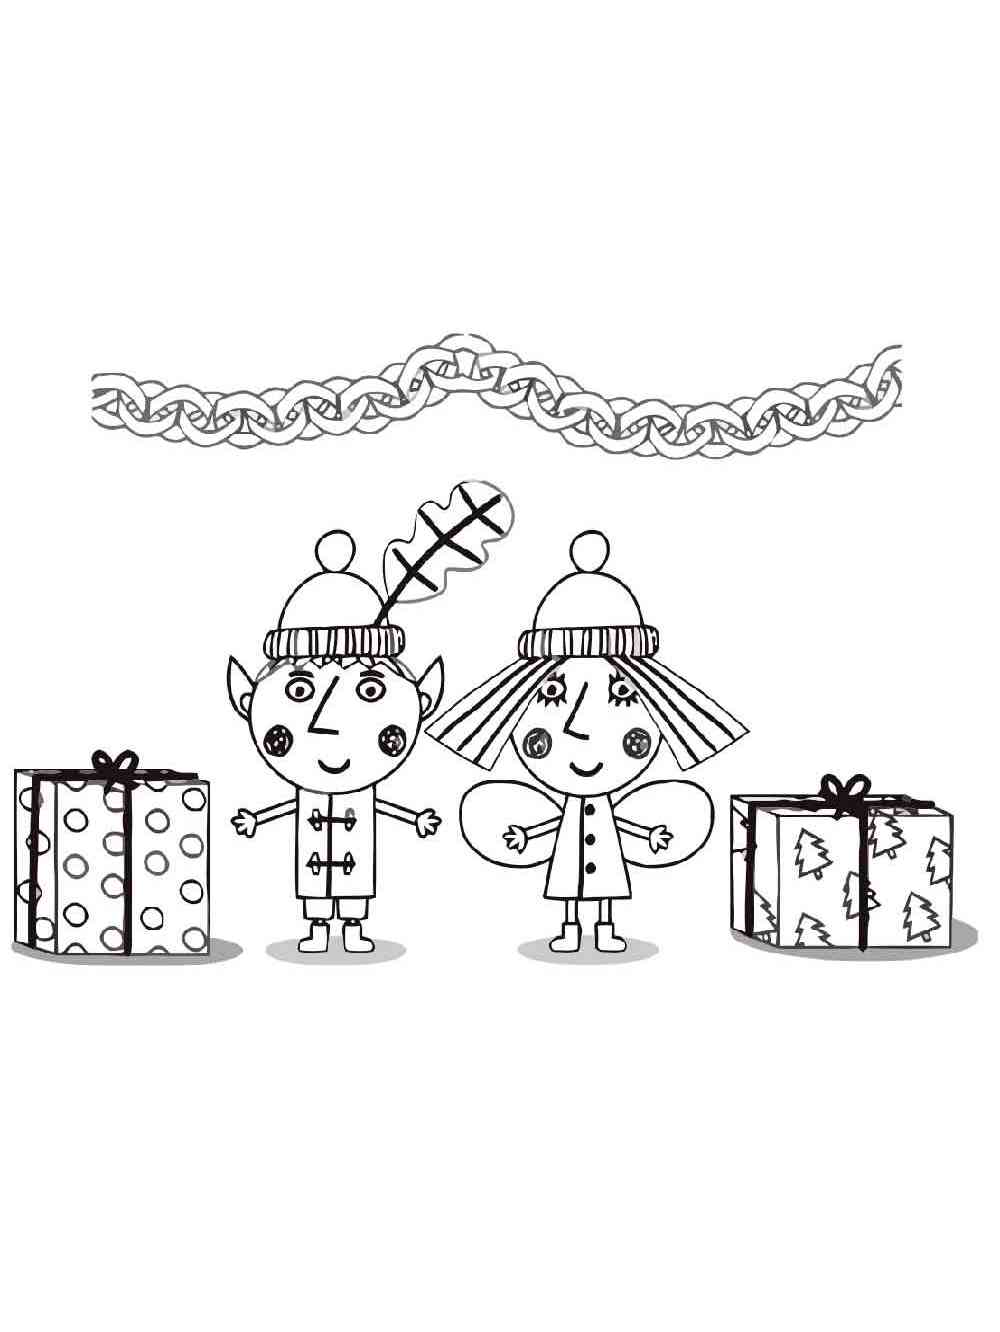 Ben and Holly Christmas coloring page